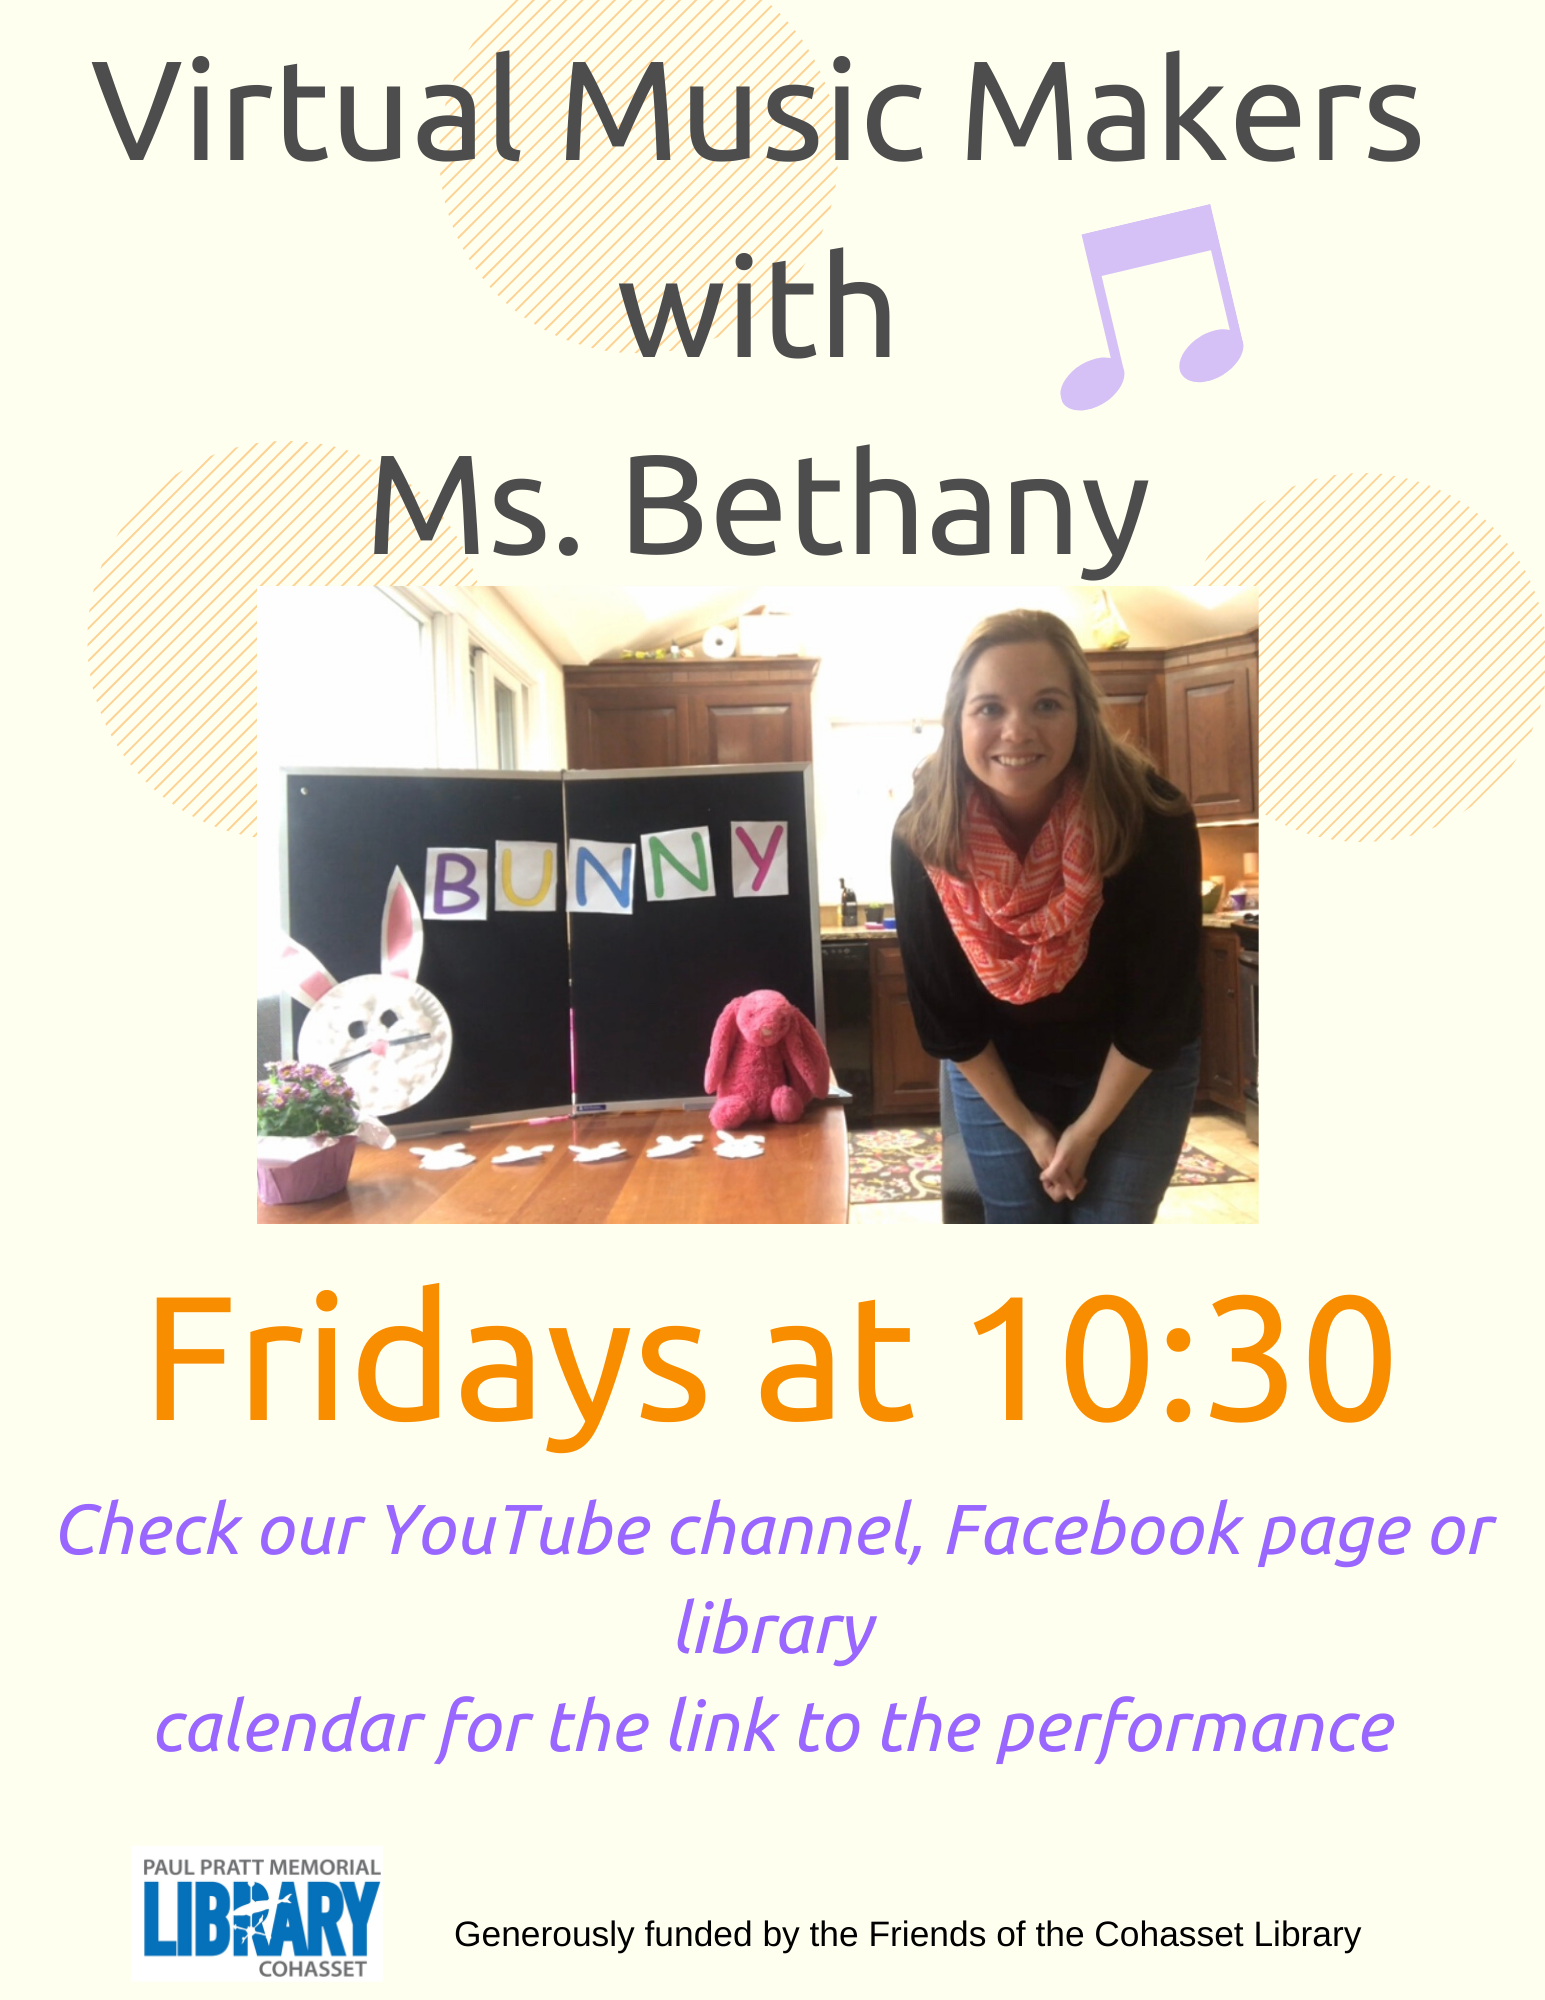 Virtual Music Makers with photo of Ms. Bethany